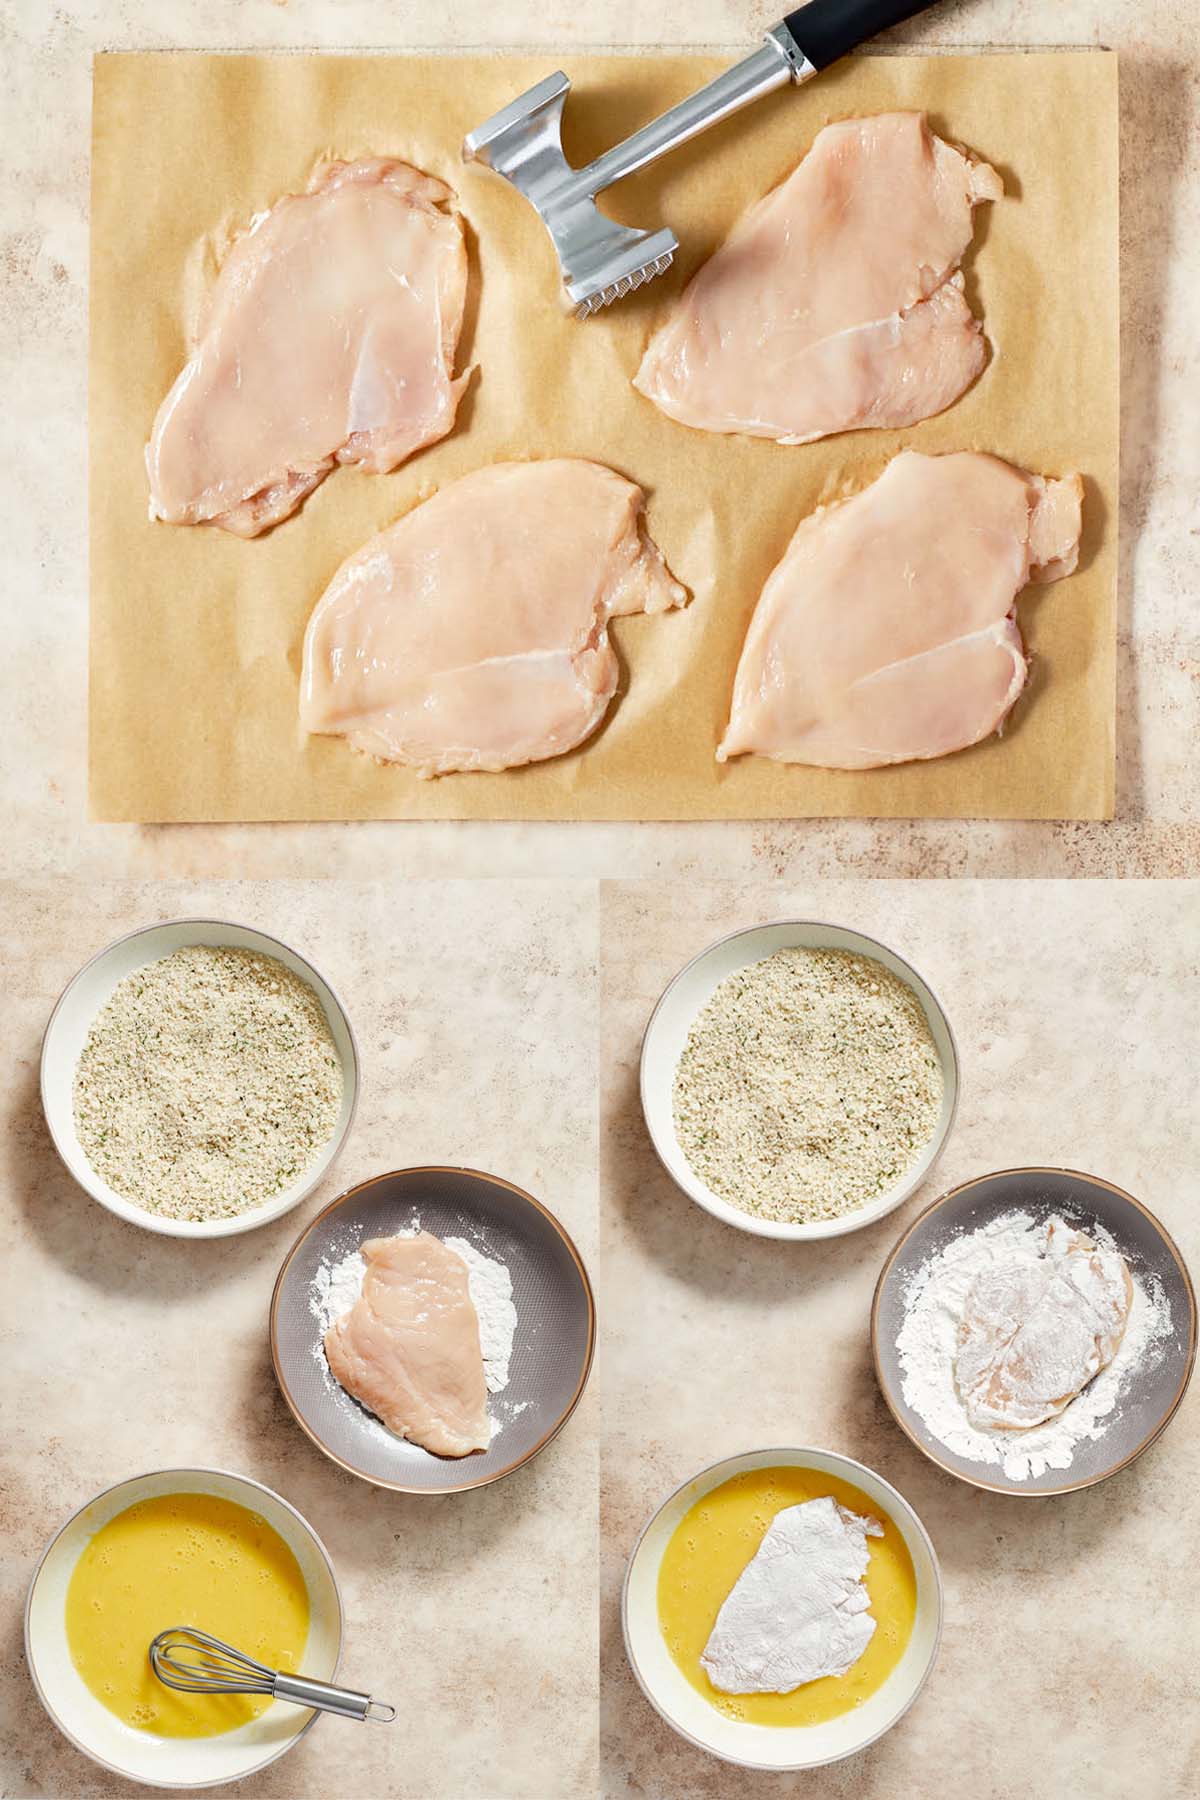 Collage of 3 images showing the process of the chicken breasts being flattened, then dredged in flour, then coated in egg mixture and bread crumbs.